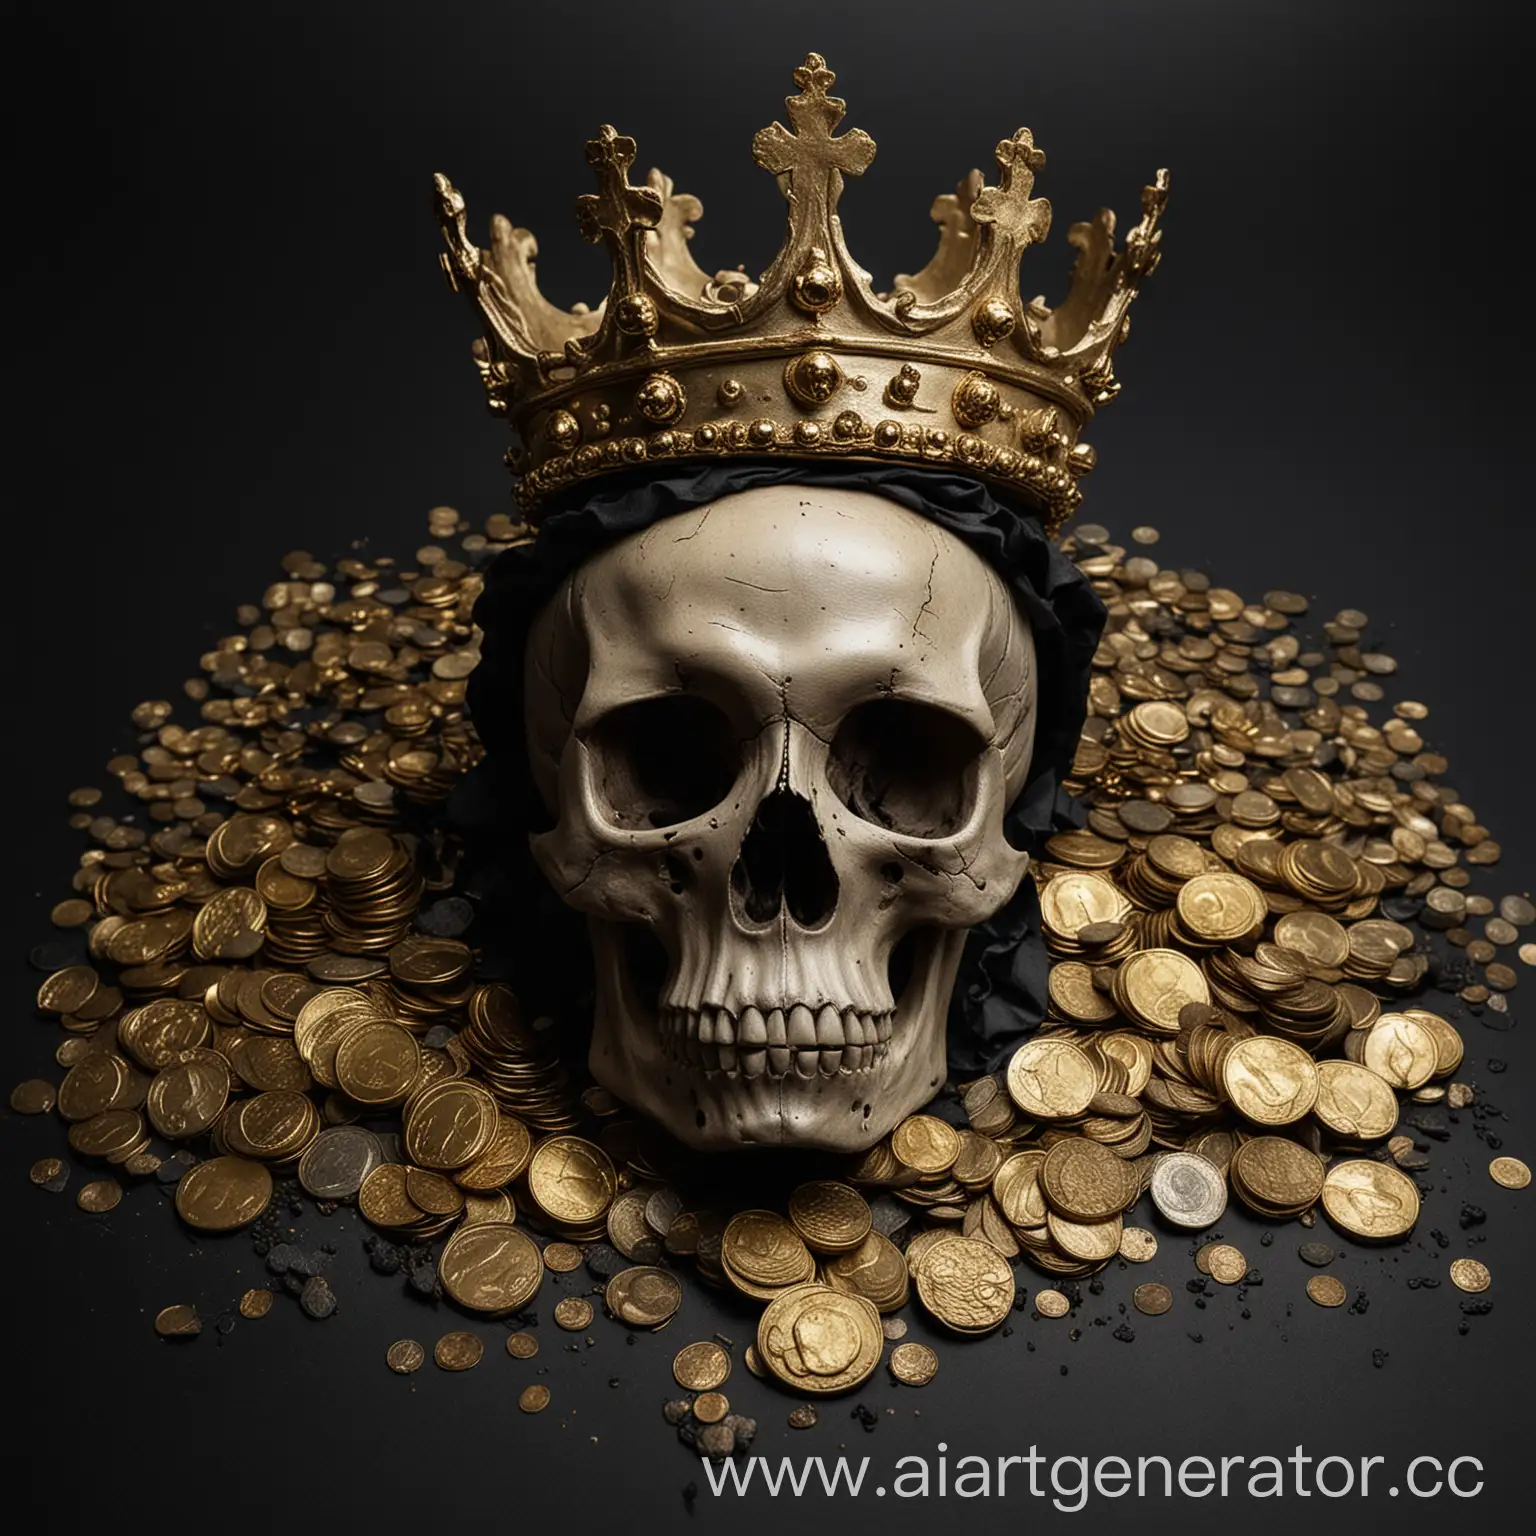 Golden-Crowned-Skull-with-Treasure-on-Black-Background